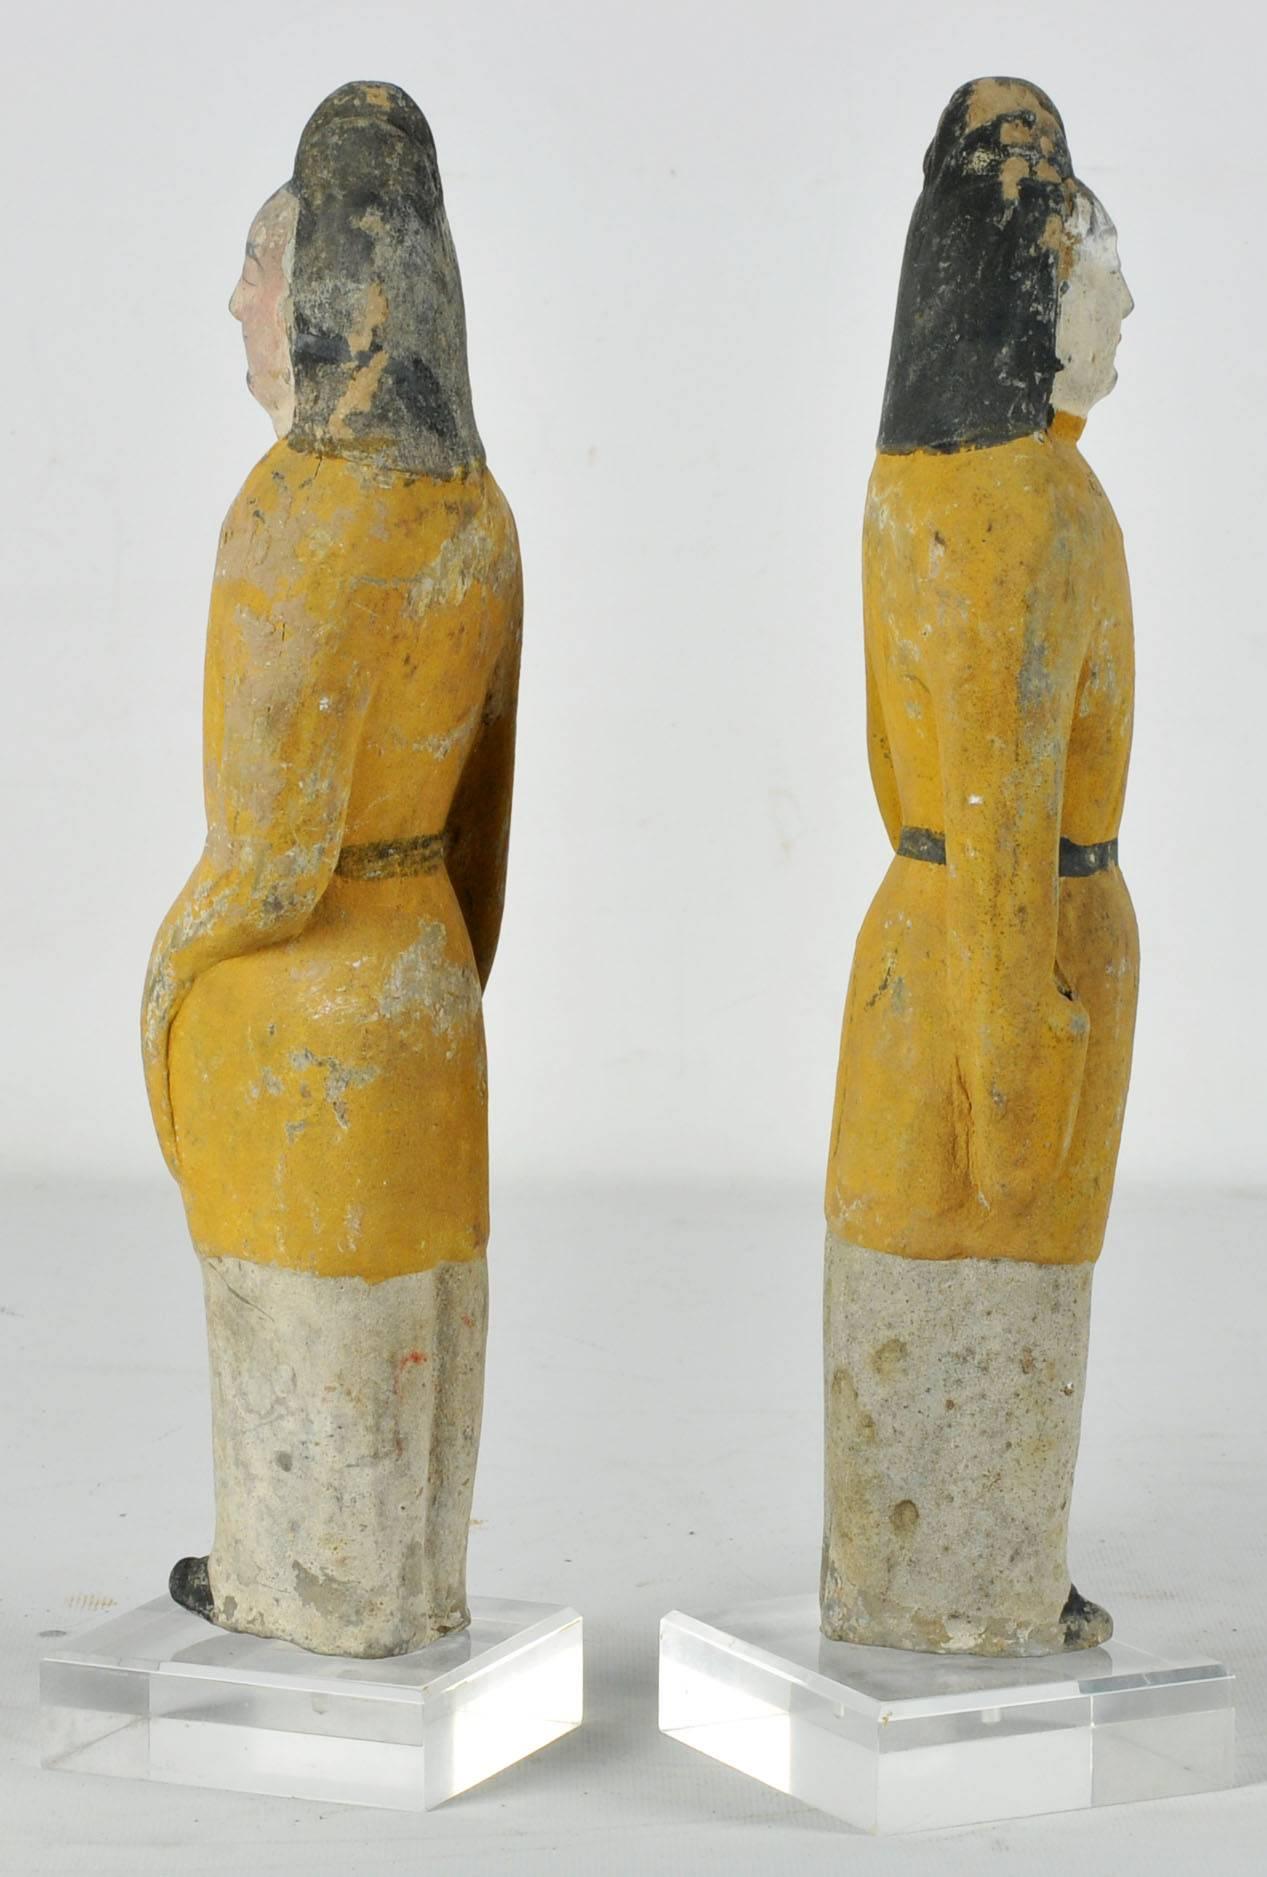 This is a lovely pair of 1400 year old figures from ancient China, a beautifully hand painted pottery pair of military officers wearing tricorn hats and belted tunics, 12.5